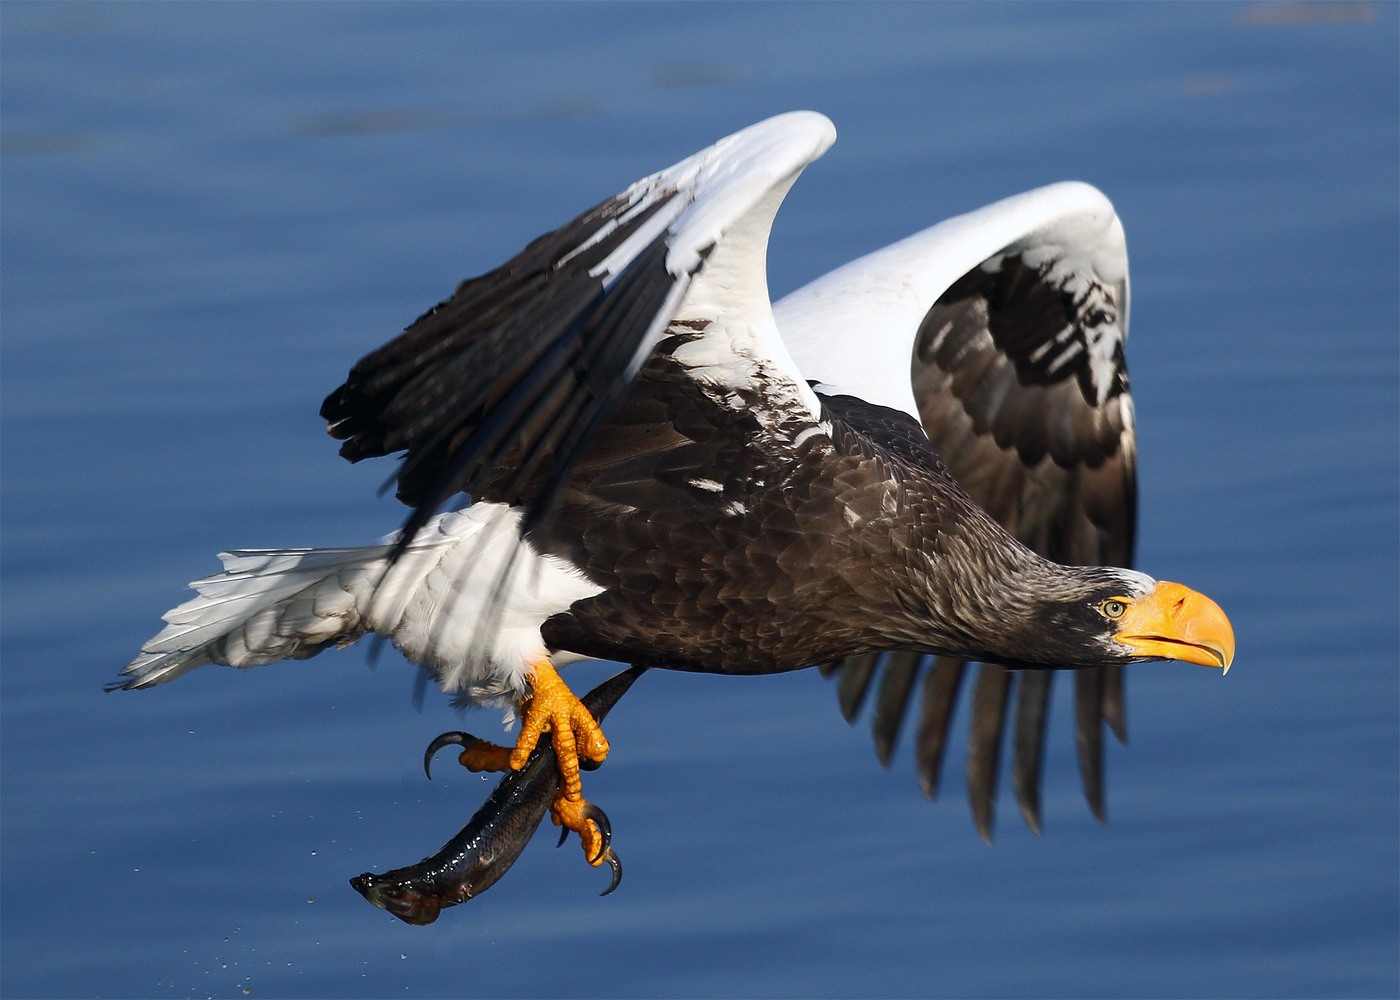 Steller's sea eagle with prey